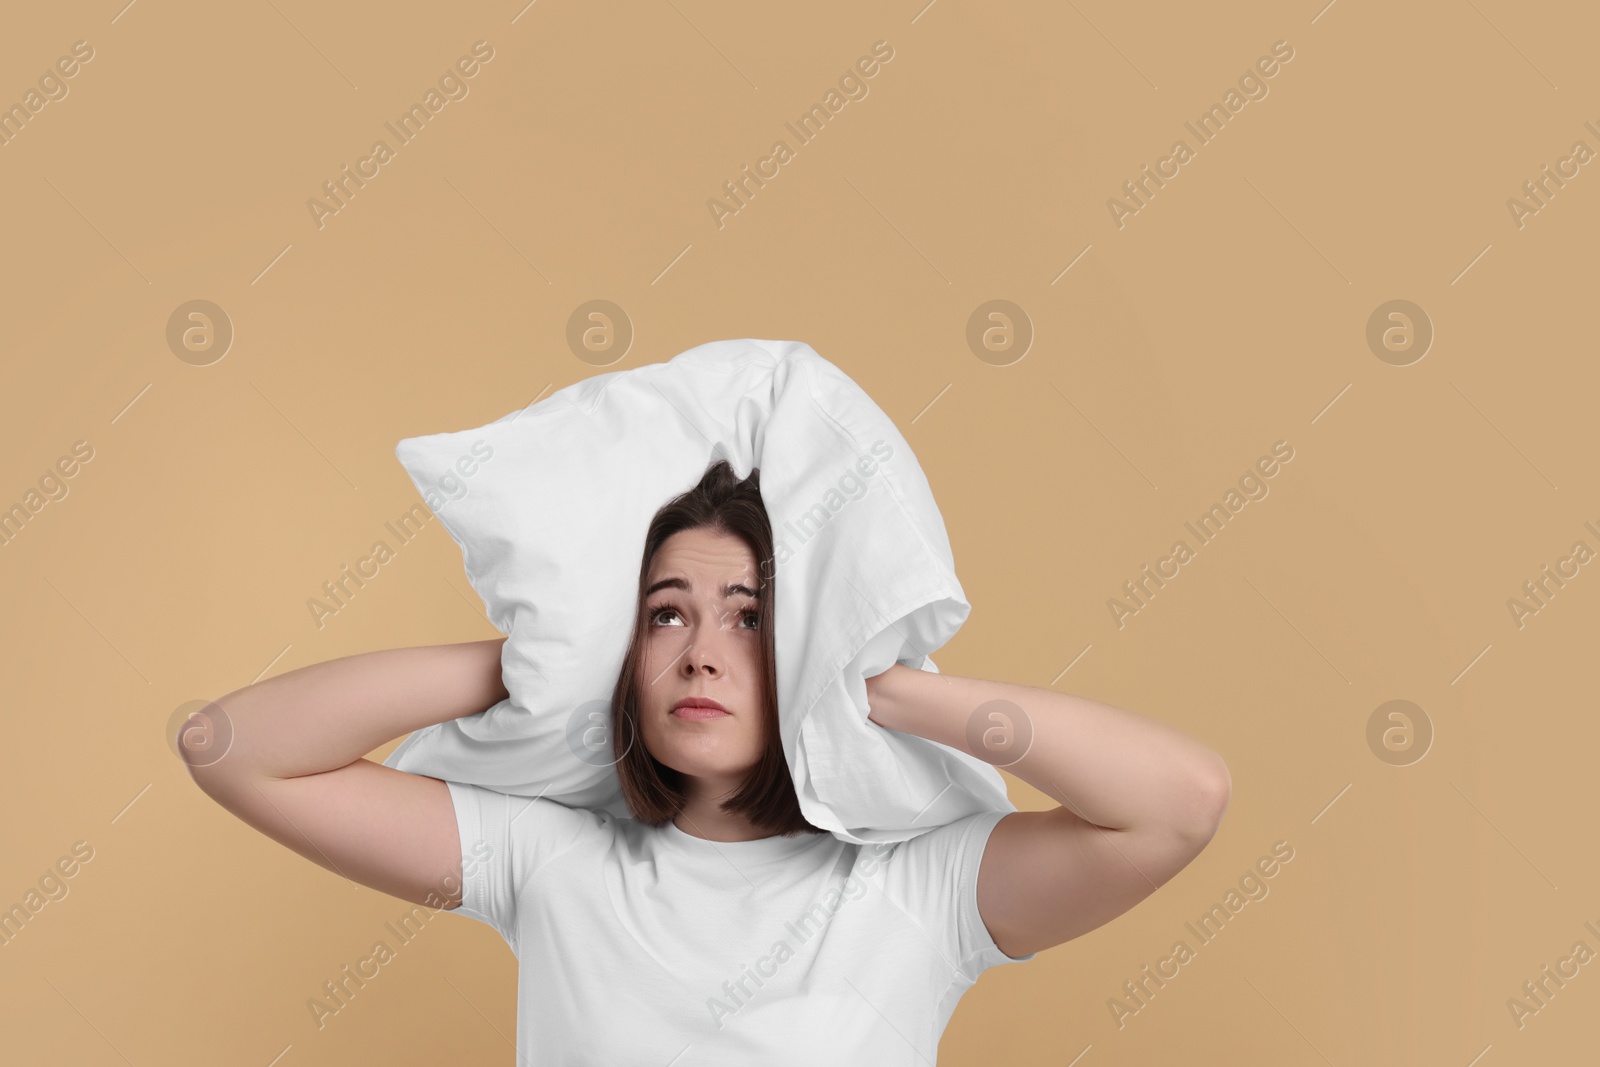 Photo of Unhappy young woman covering ears with pillow on beige background. Insomnia problem